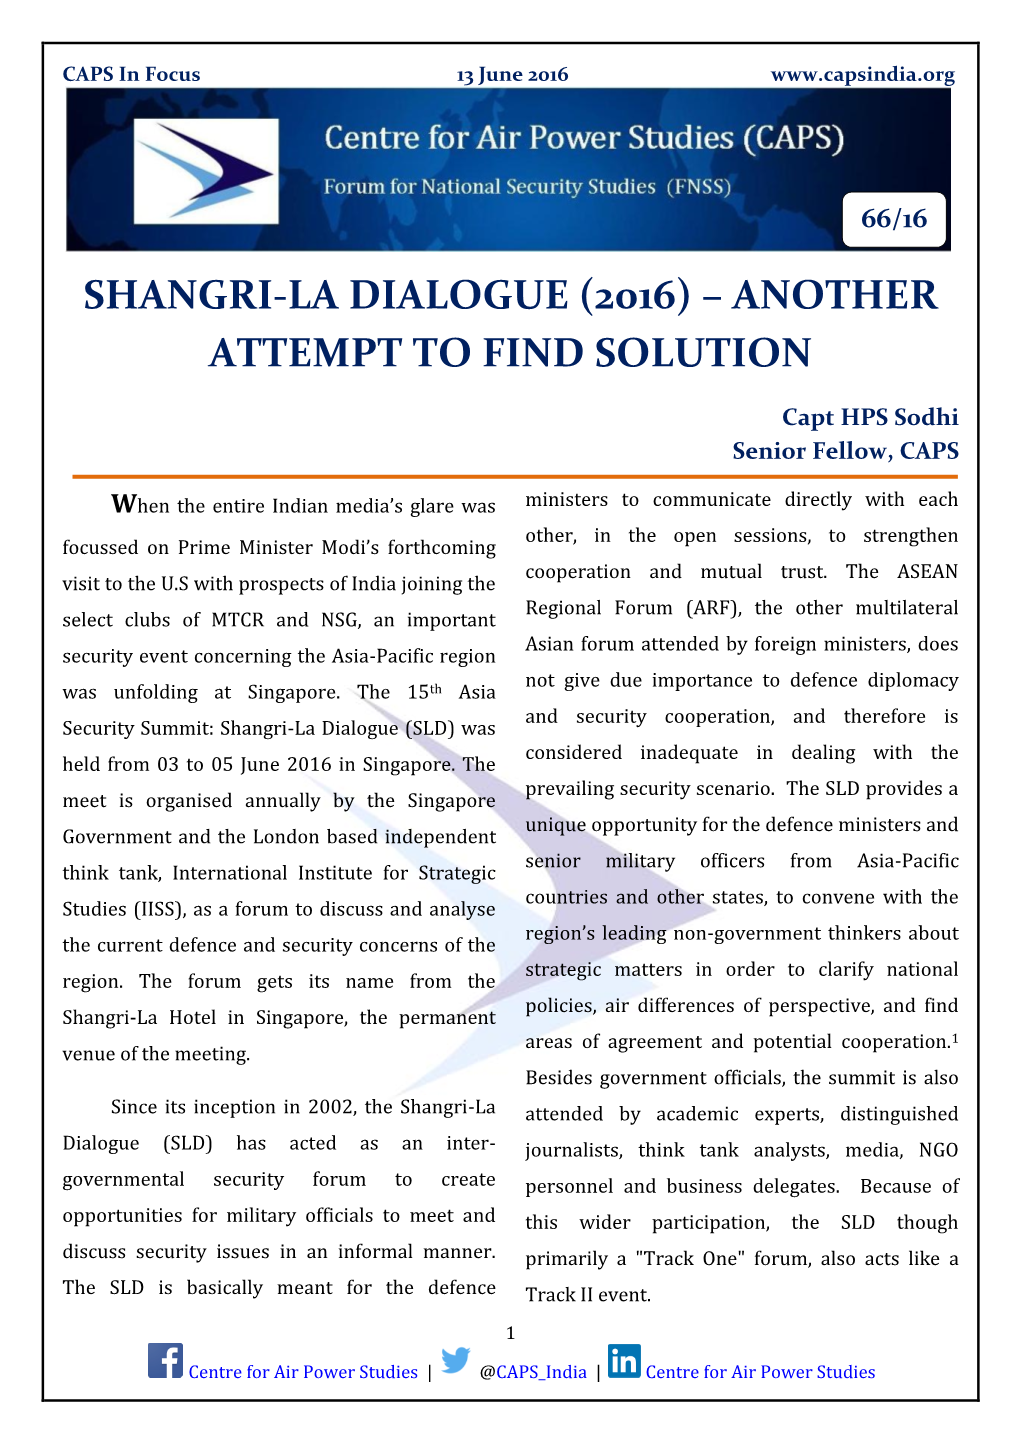 Shangri-La Dialogue (2016) – Another Attempt to Find Solution